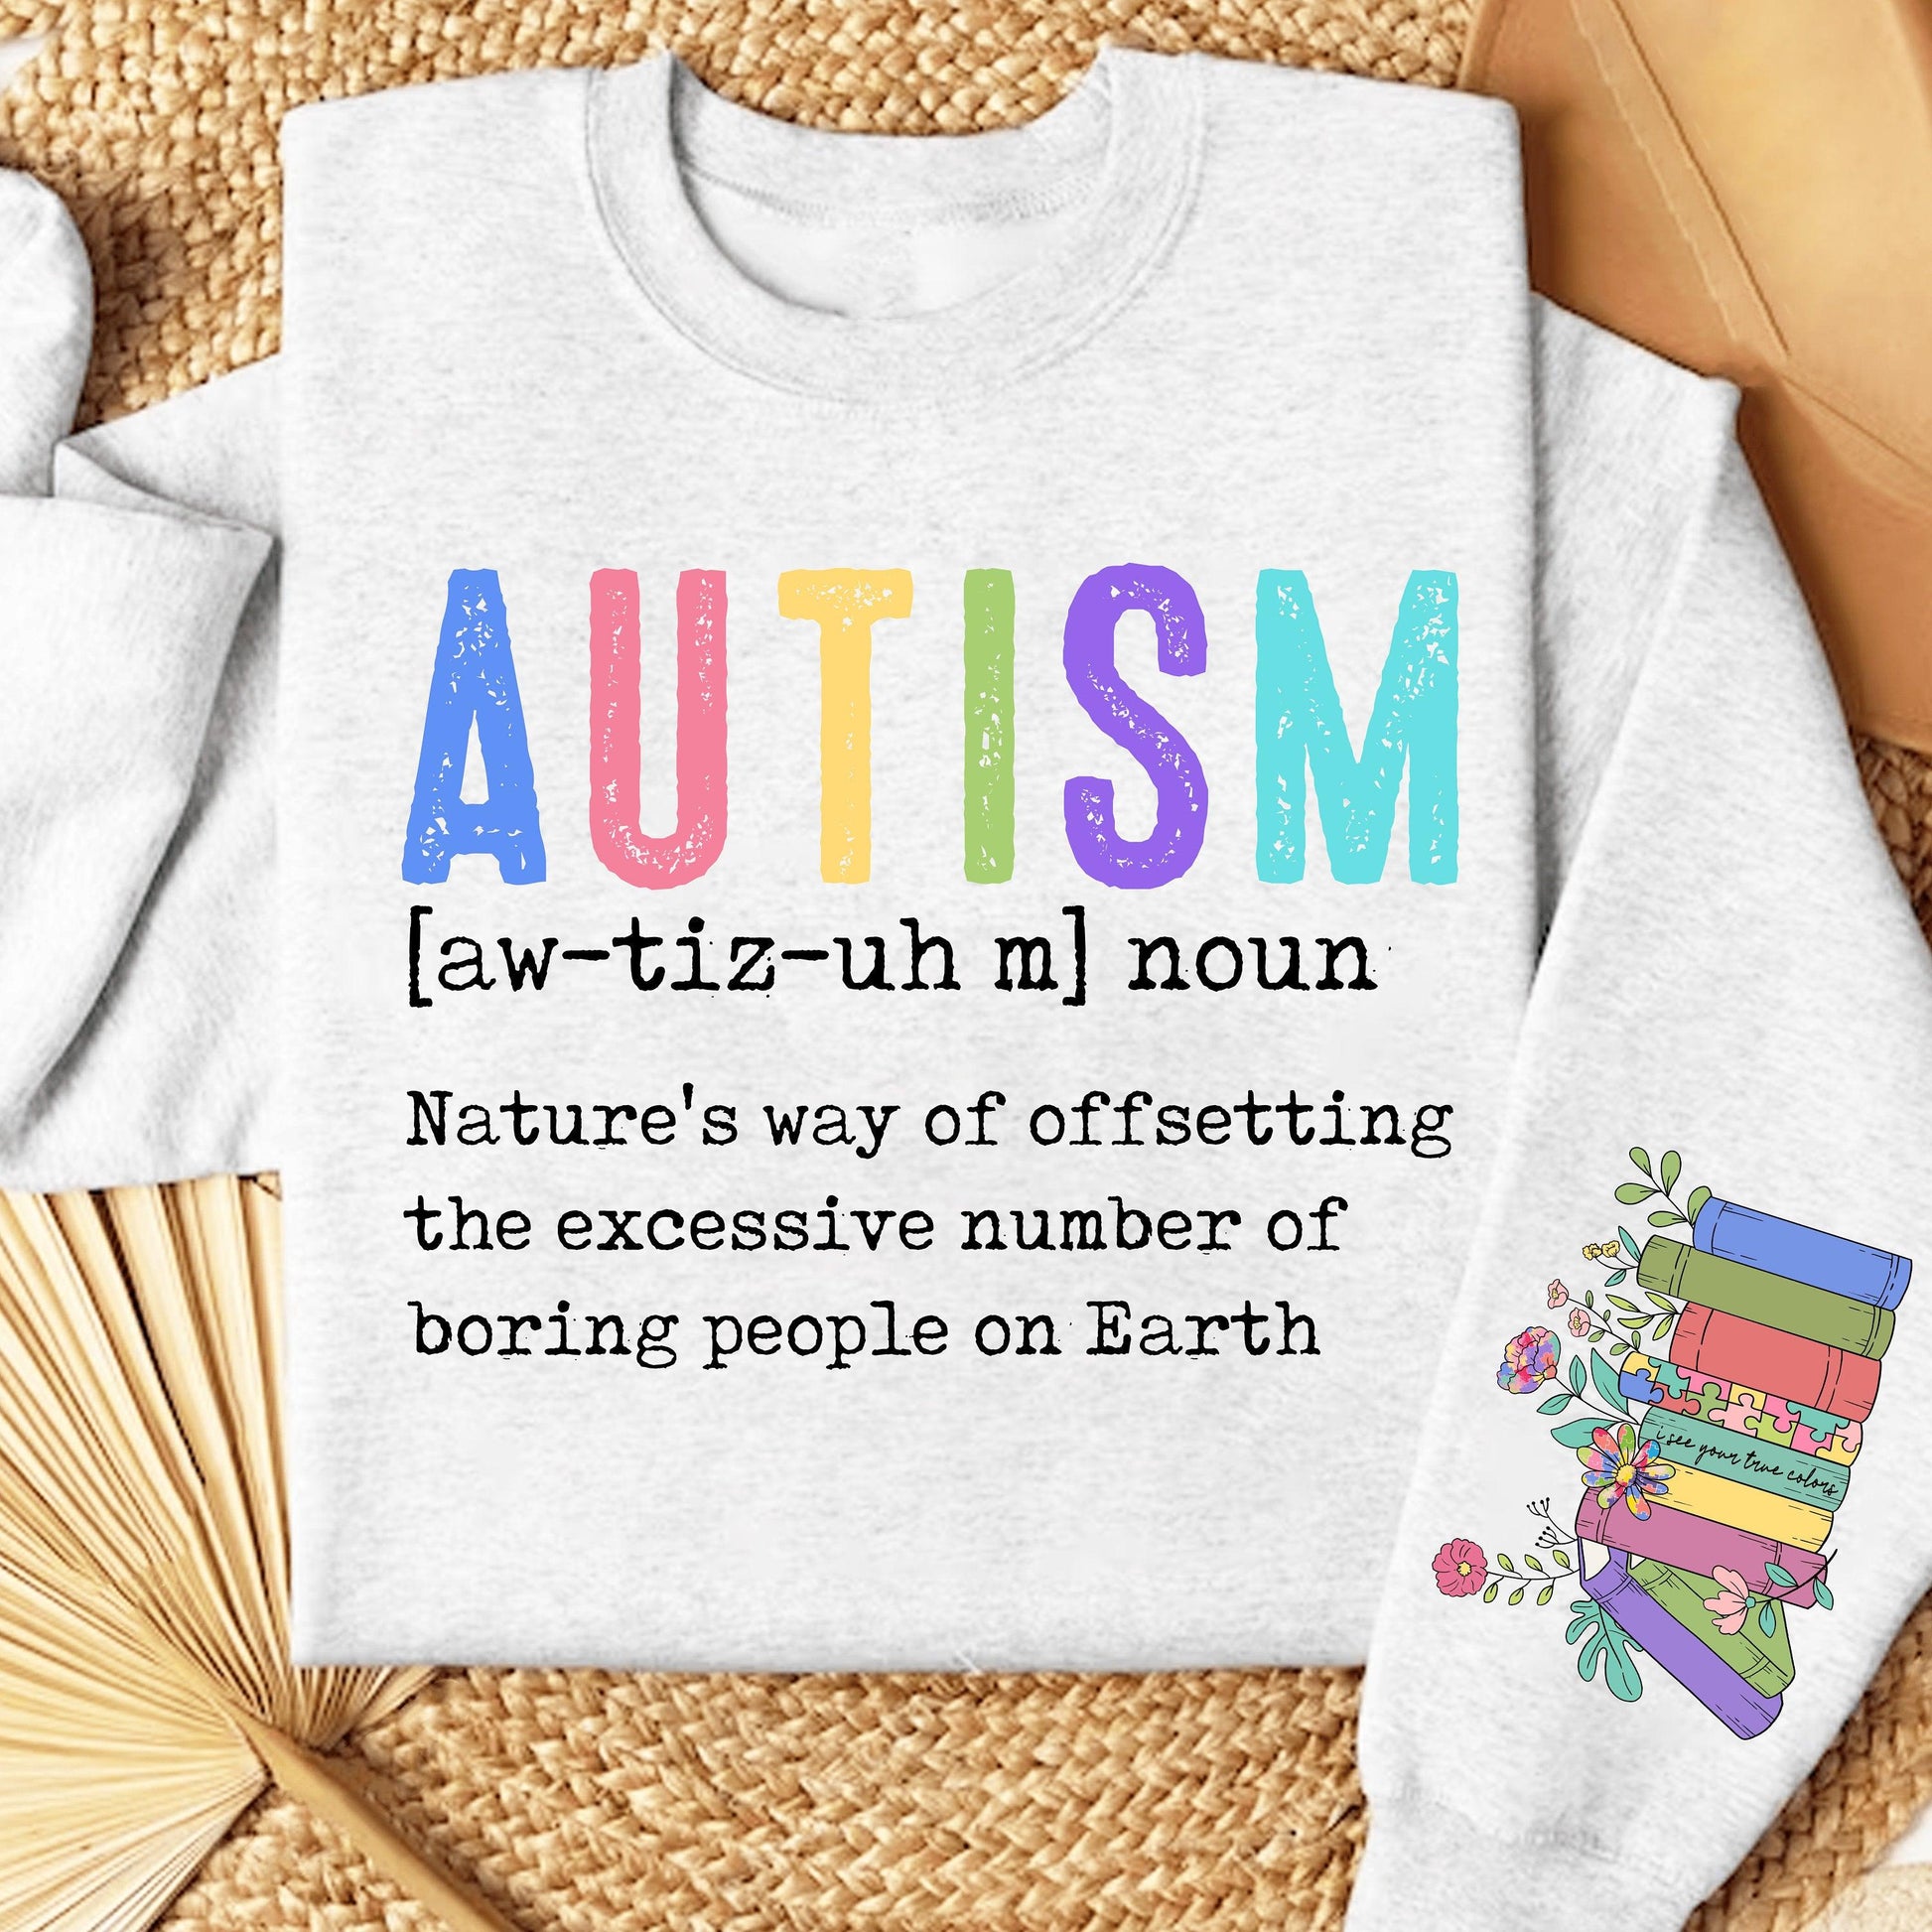 True Colors Shine: Celebrating Autism - A Heartfelt Gift for Mothers - GiftHaus